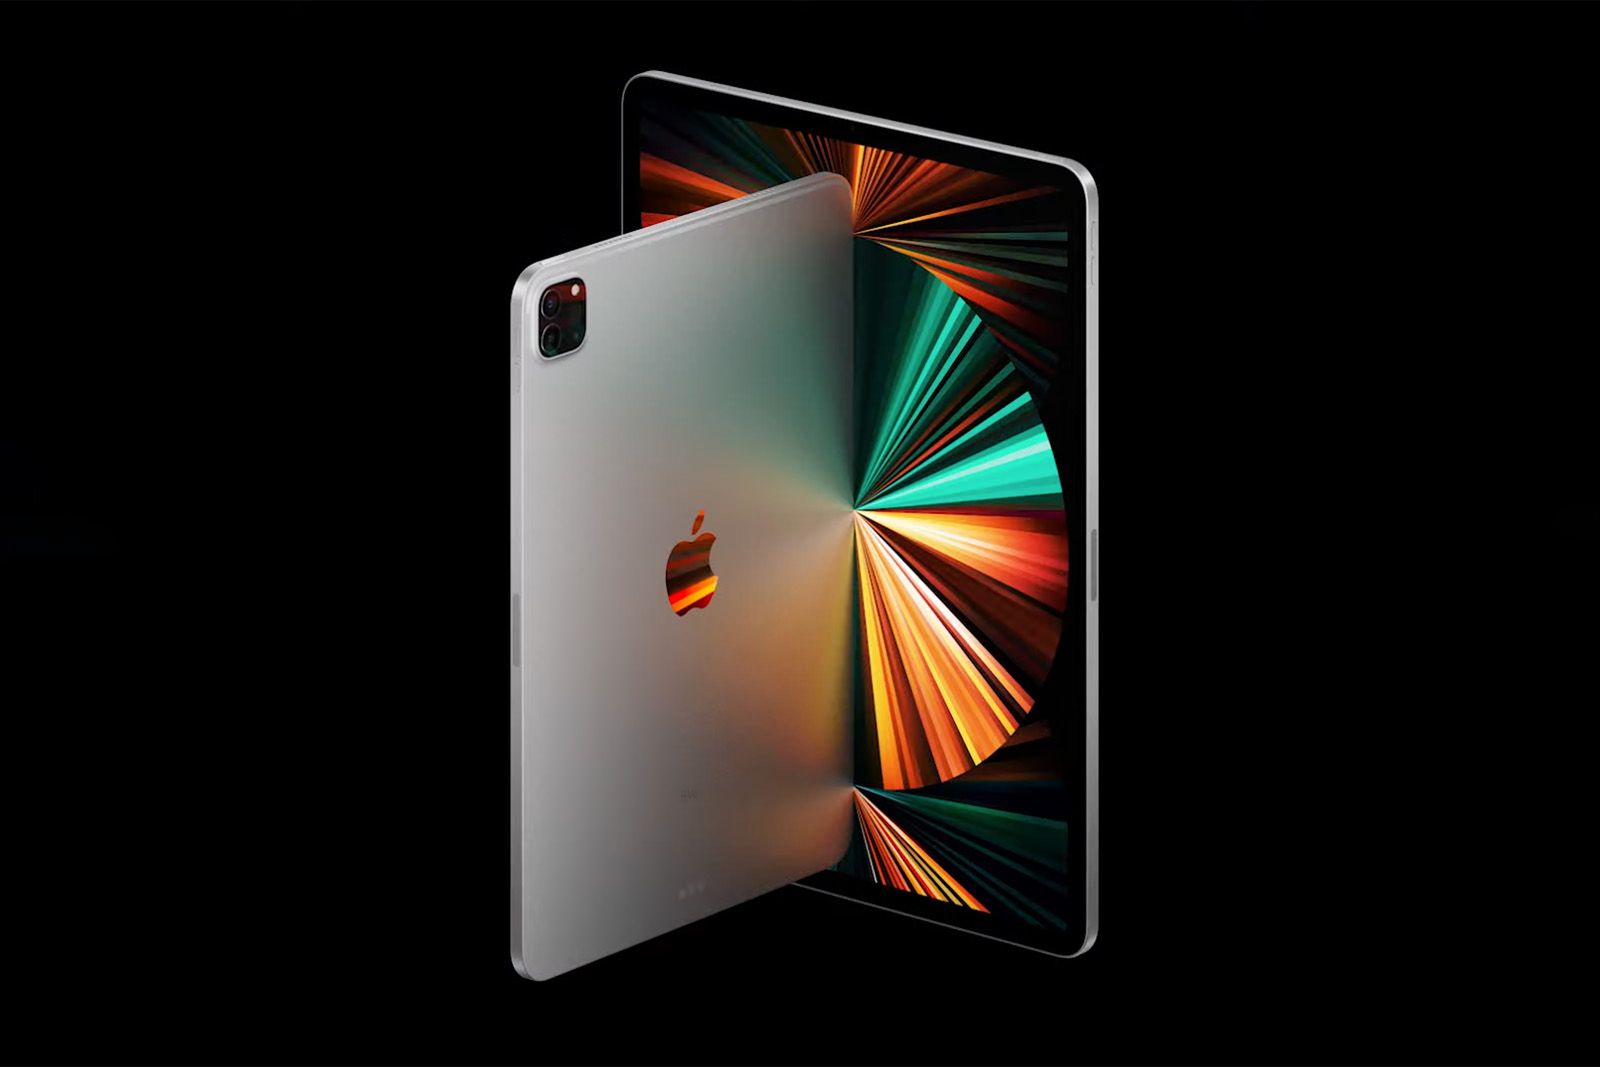 New iPad Pro gets M1 chp and 5G photo 2